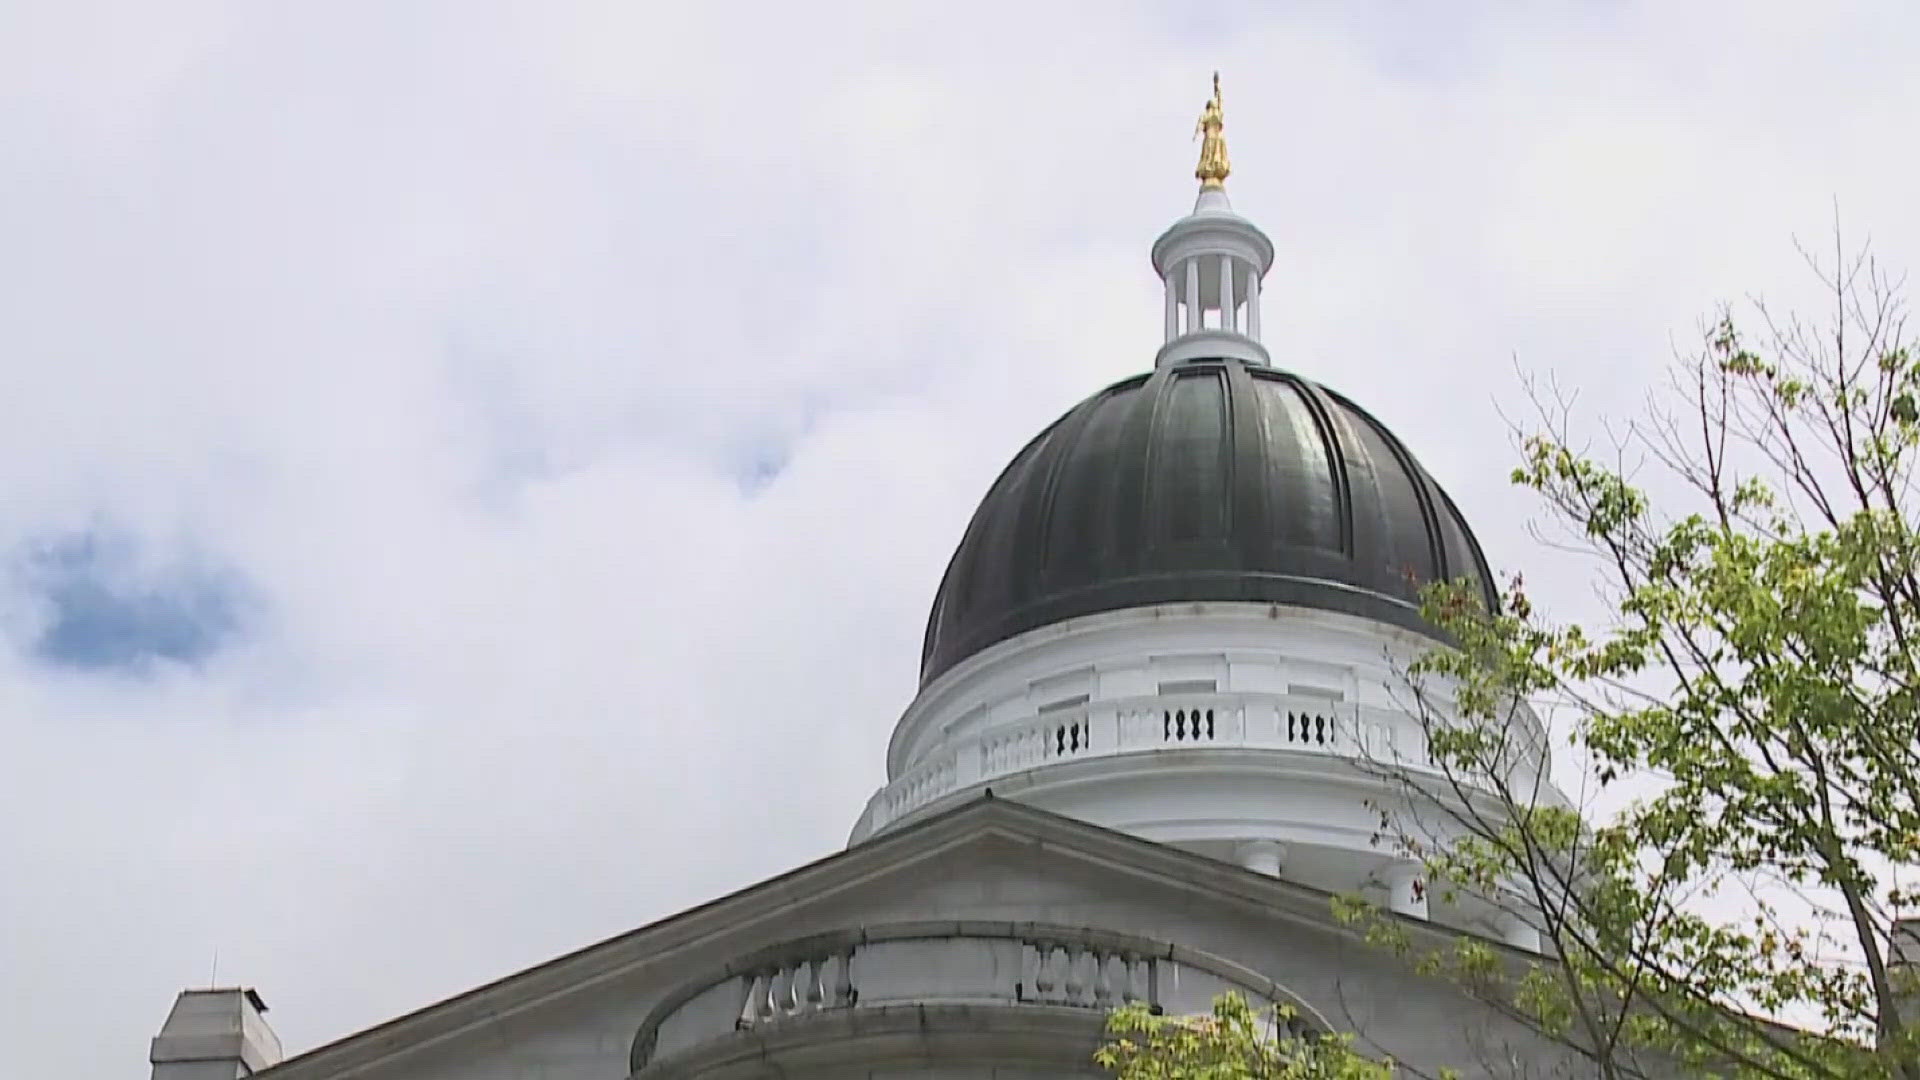 They will also consider dozens of spending bills that the governor is speaking out against.